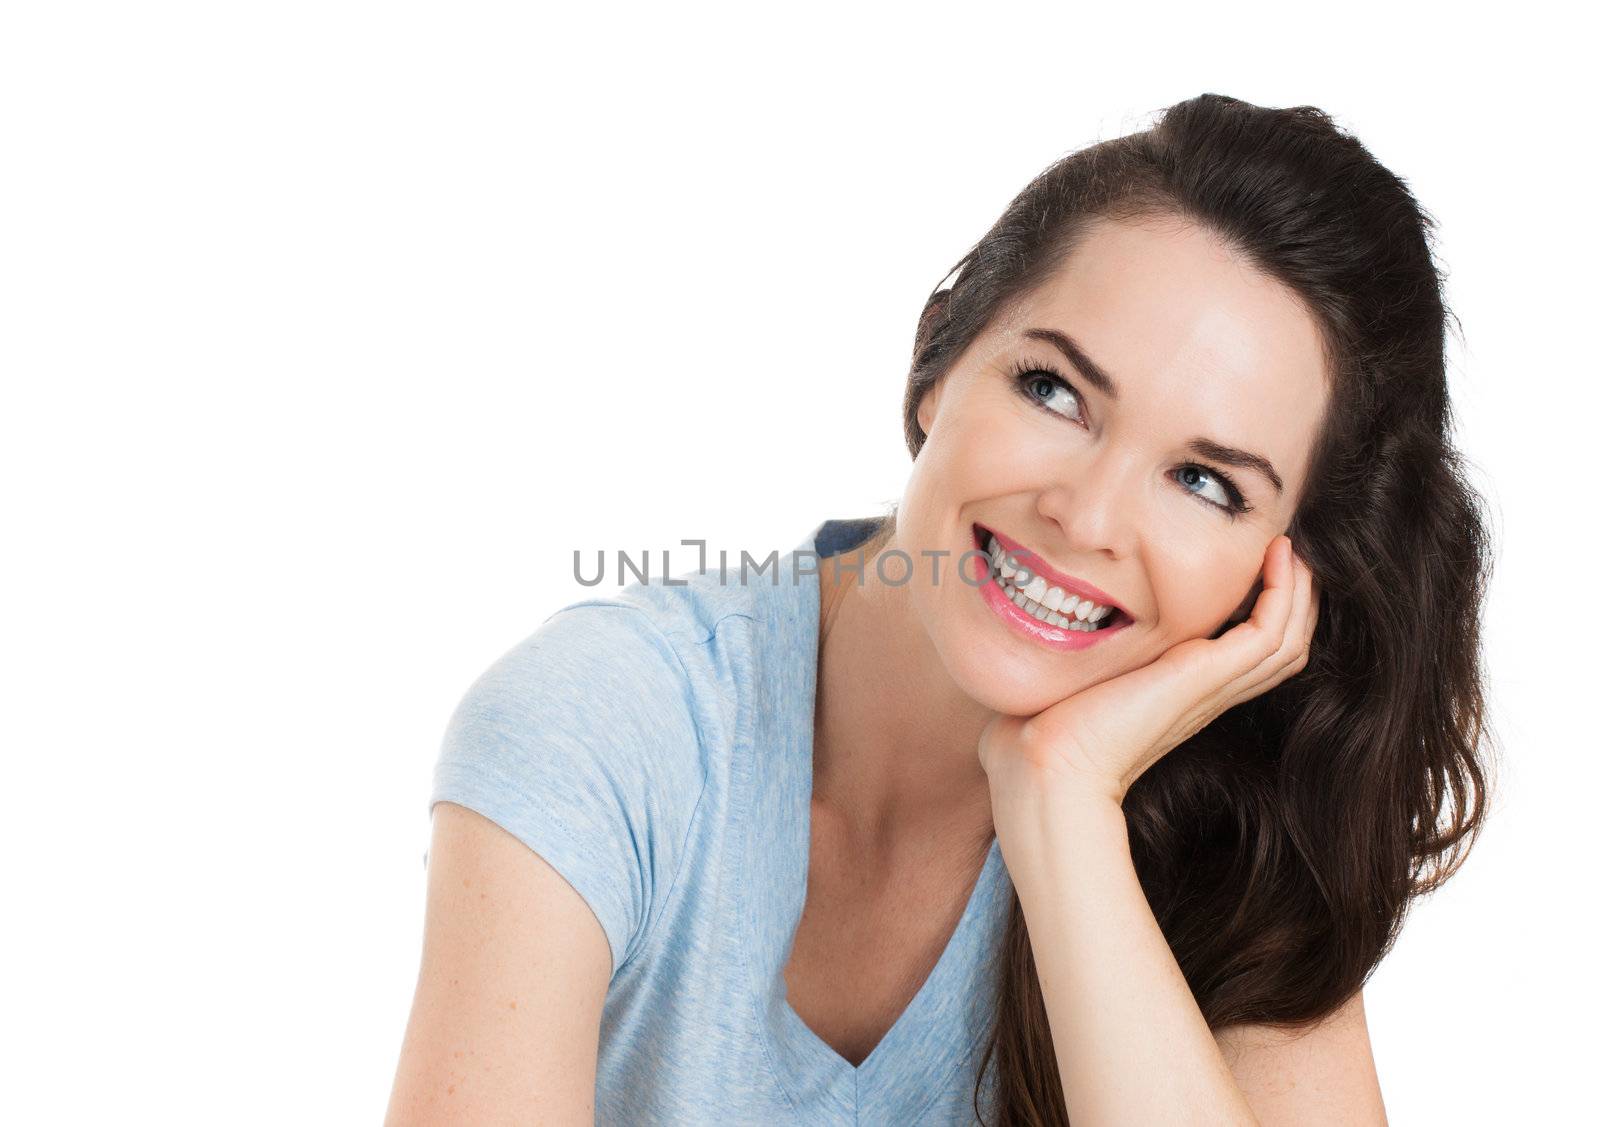 A close-up portrait of a beautiful happy smiling woman looking up at copyspace. Isolated on white.